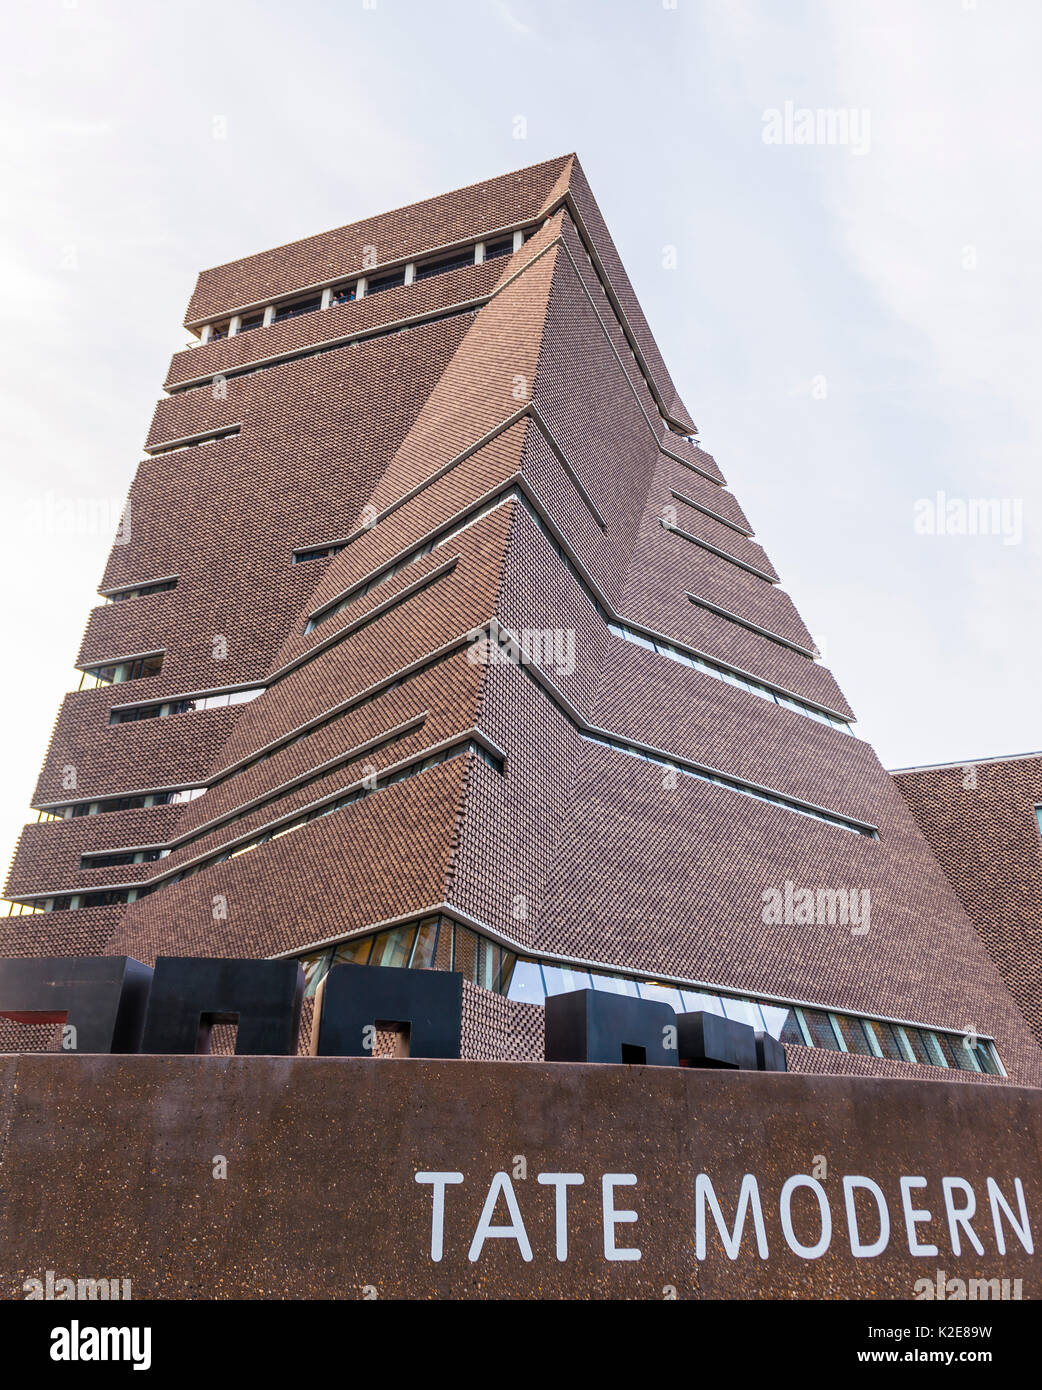 Tate Modern, Londres, Angleterre, Royaume-Uni Banque D'Images